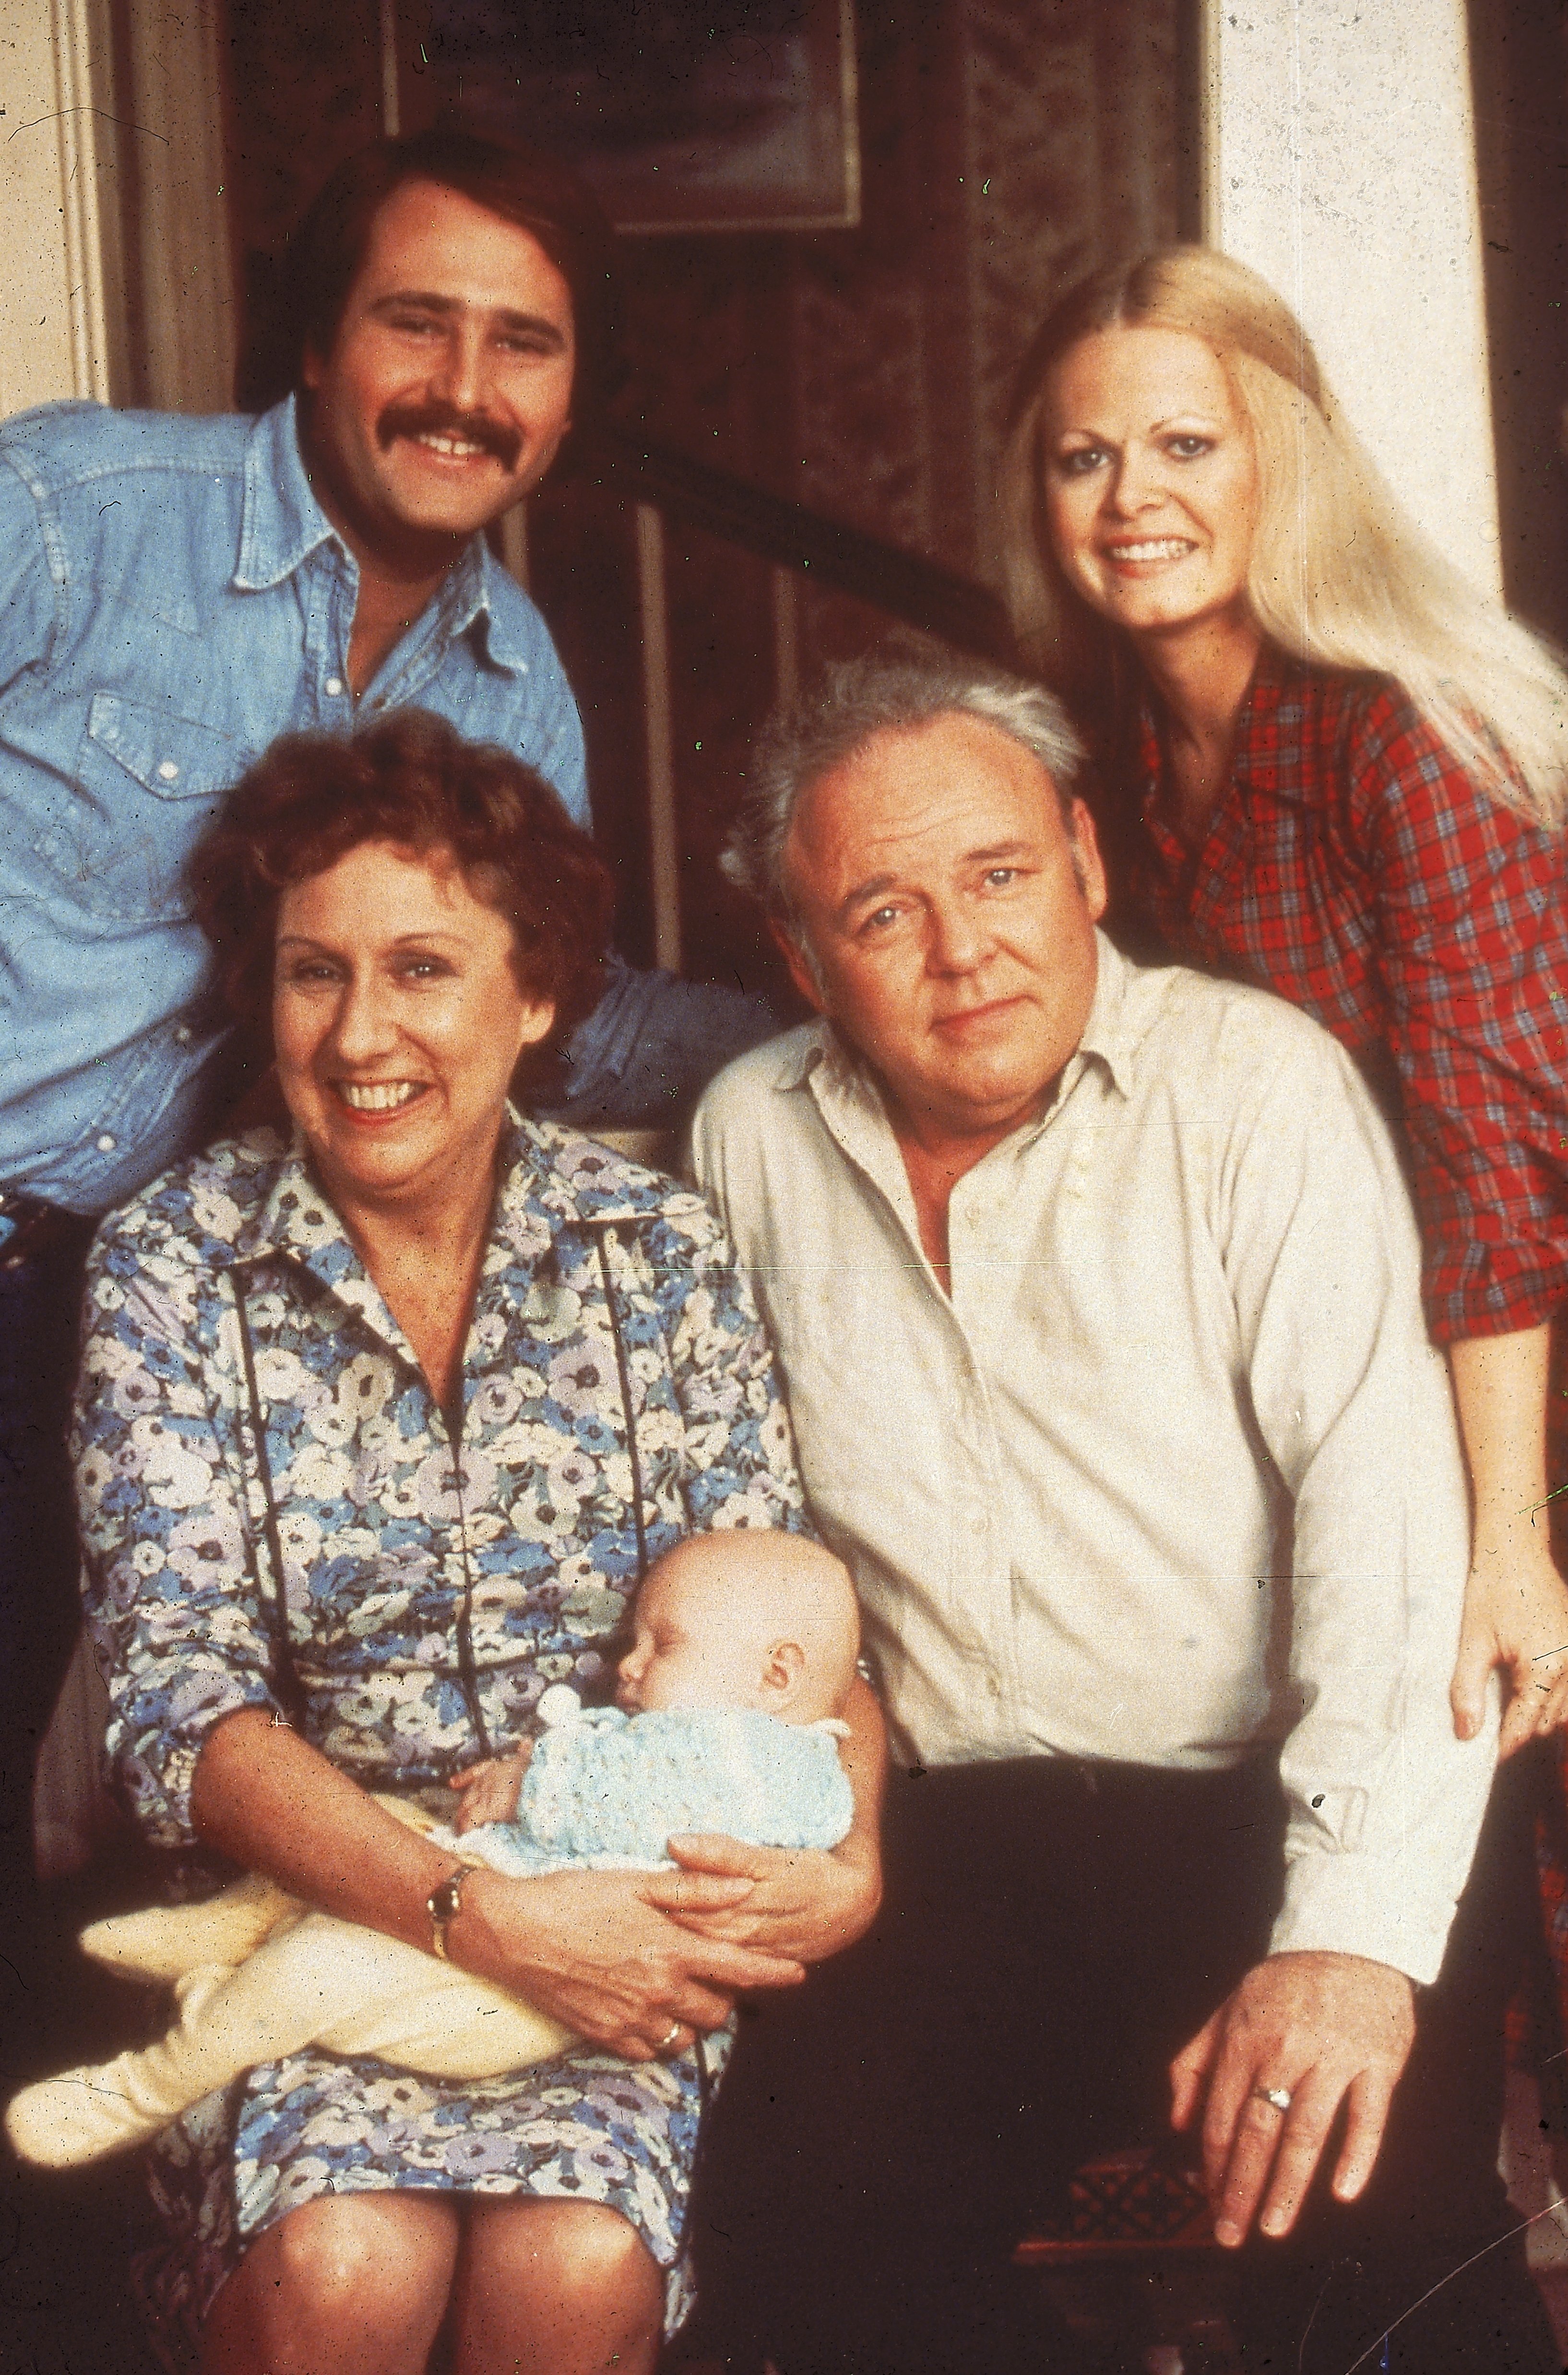 "All in the Family" cast: Carroll O'Connor, Jean Stapleton holding Corey M. Miller, Rob Reiner and Sally Struthers | Source: Getty Images